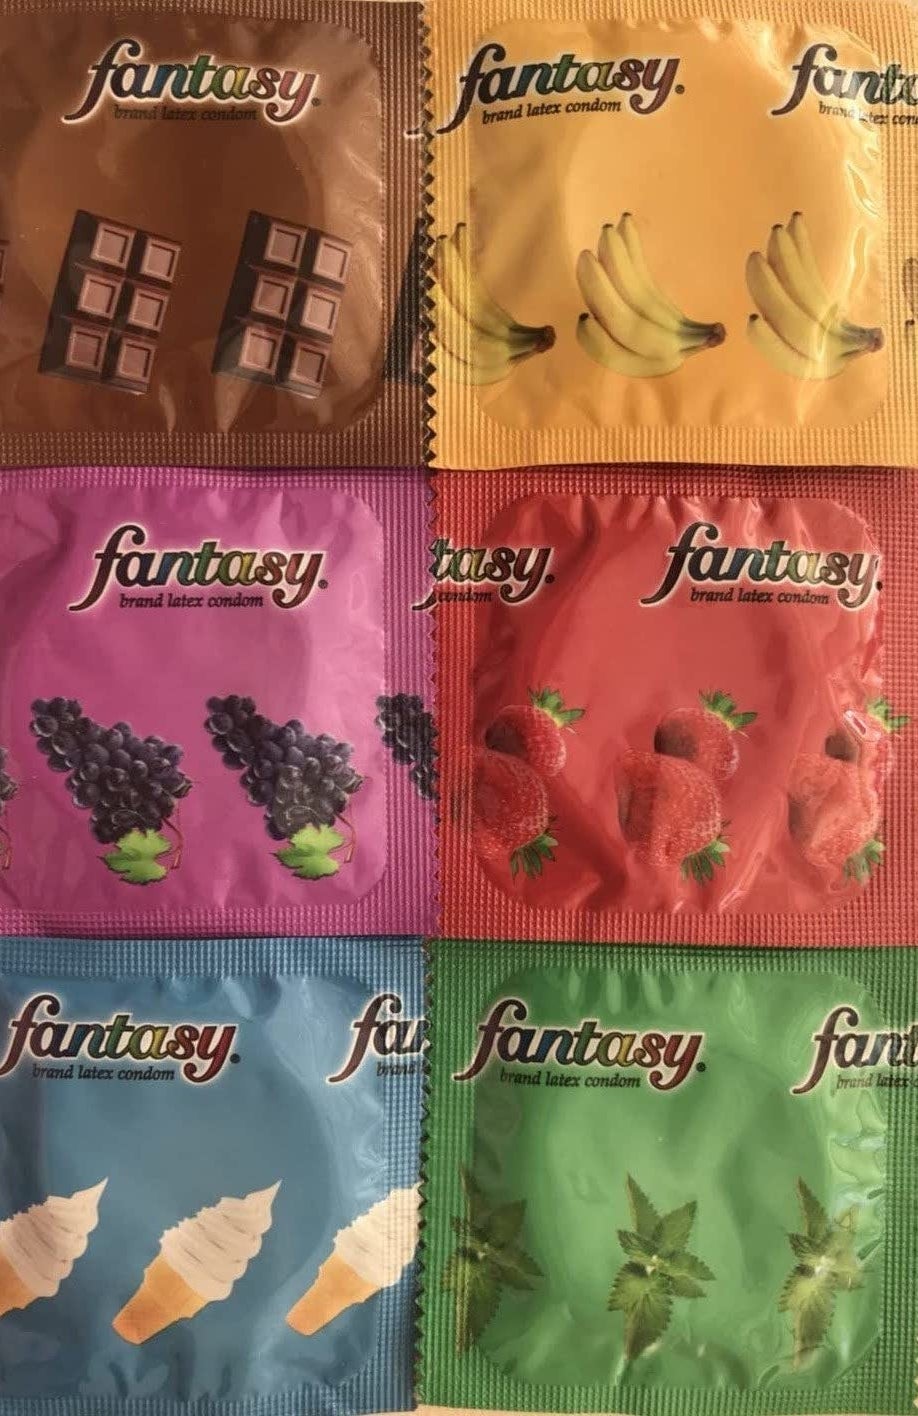 several condom wrappers with graphics of the different flavors on the wrappers